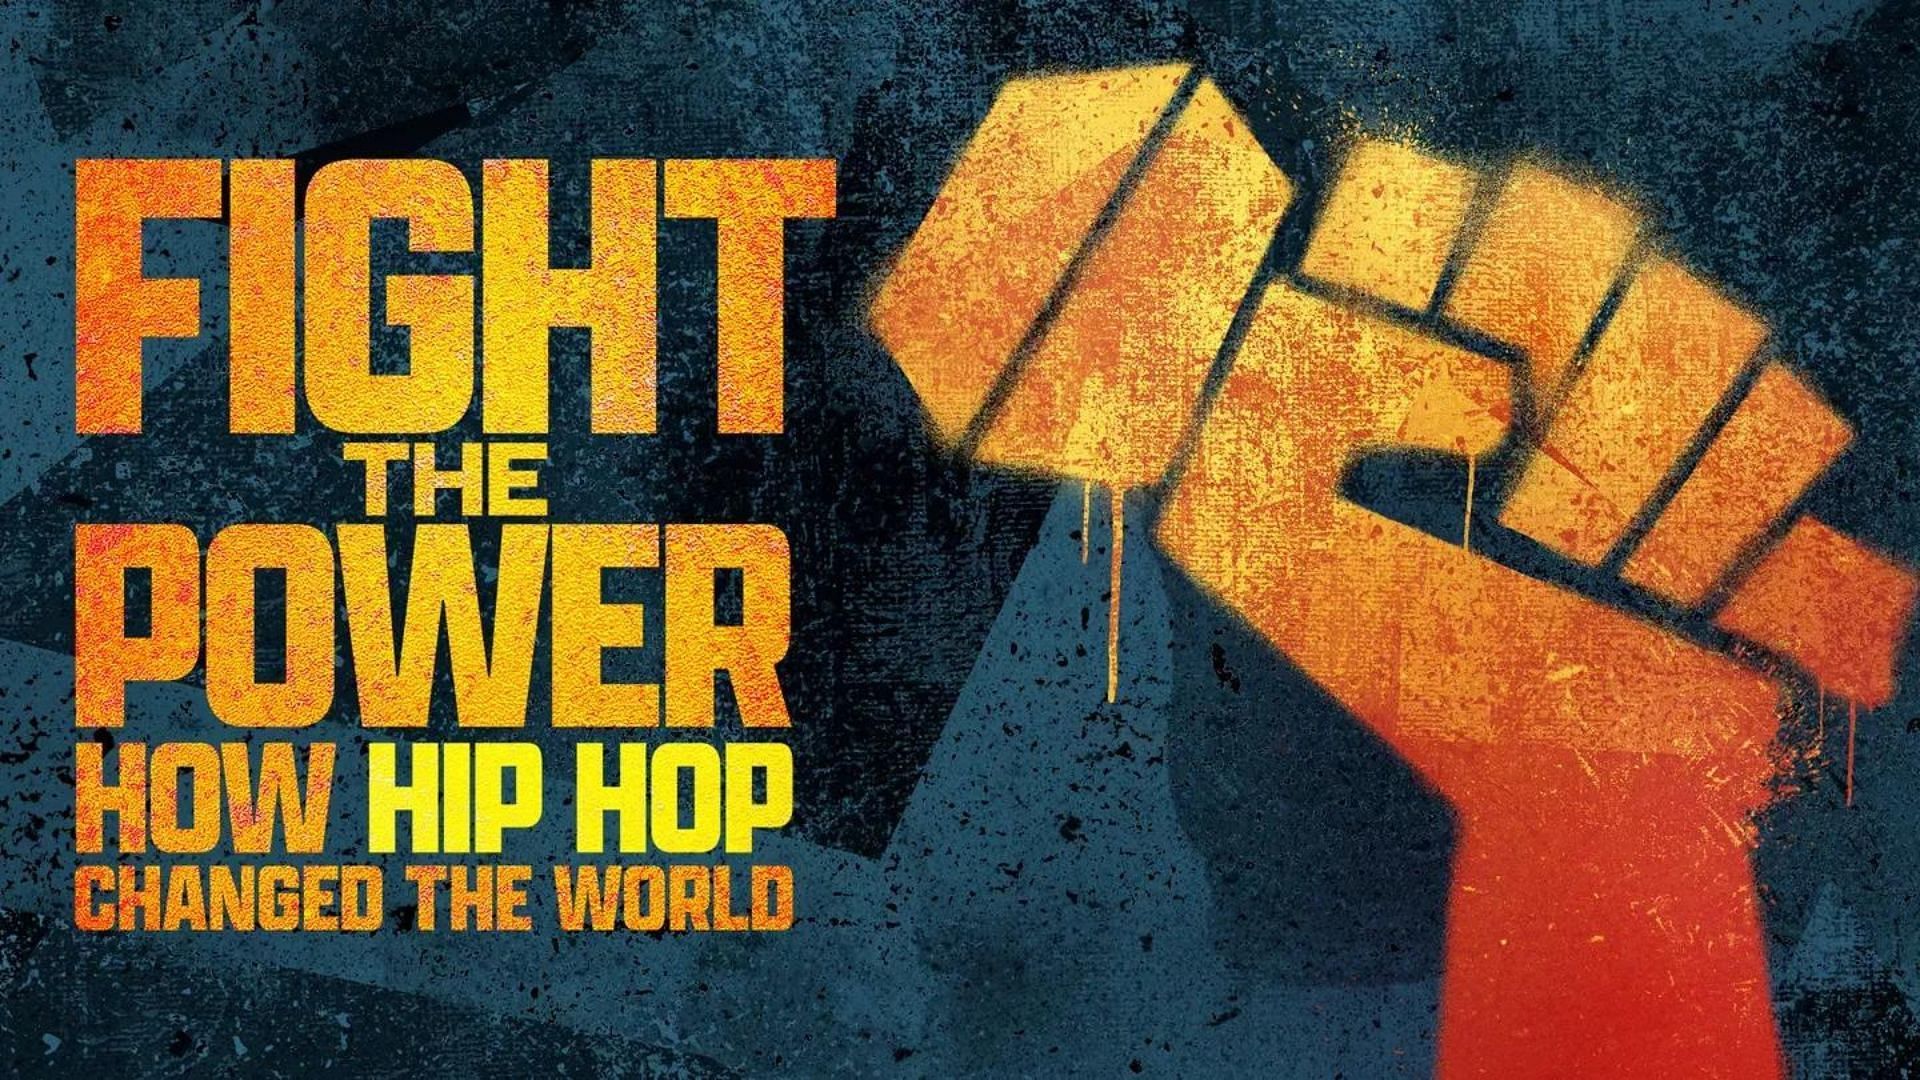 Fight the Power: How Hip Hop Changed the World on PBS: Release date, air time, plot, and more